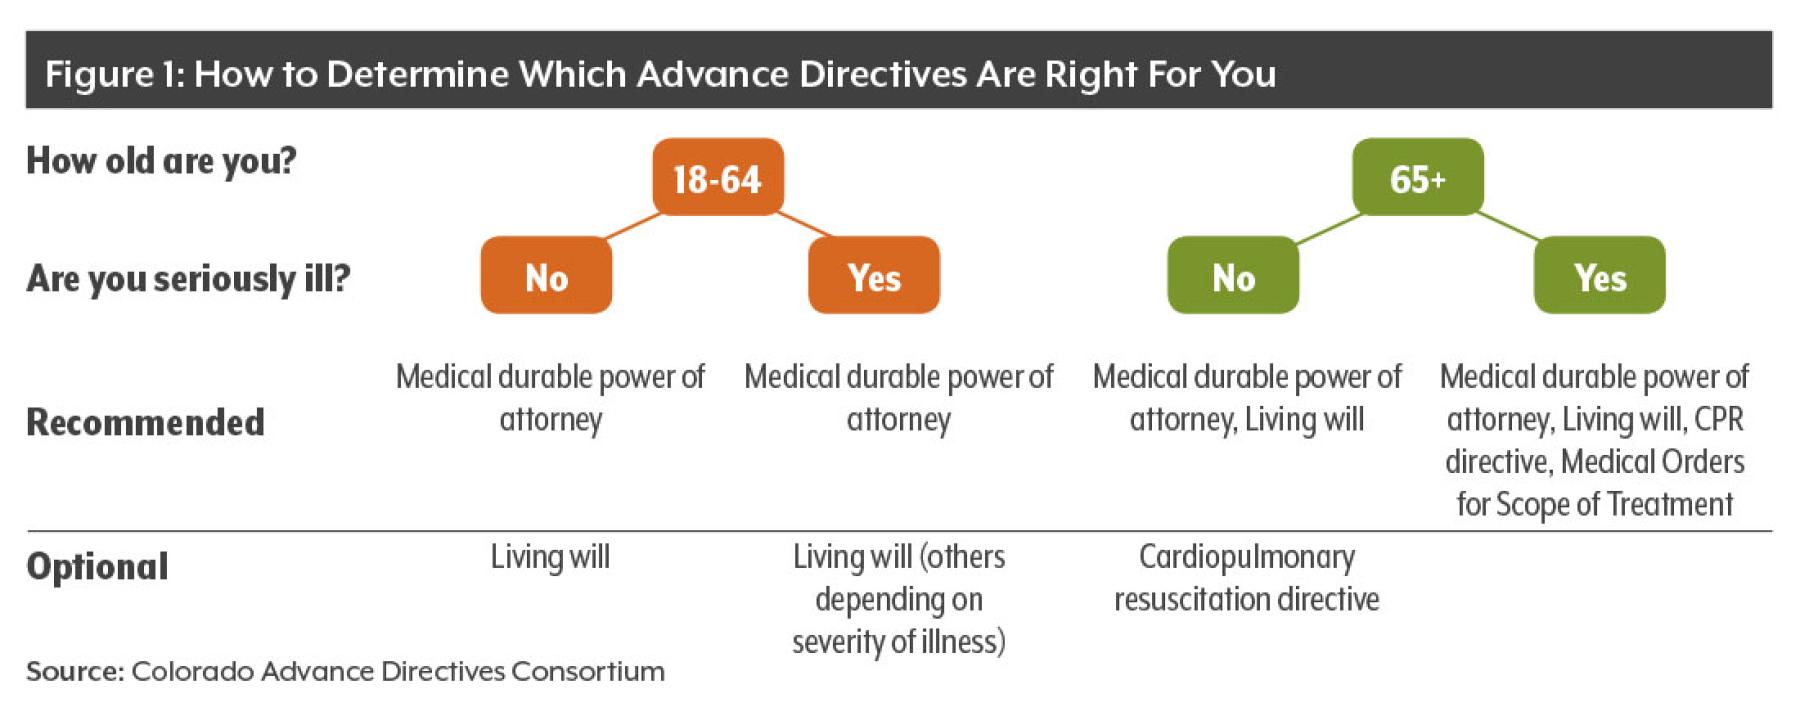 How to Determine Which Advance Directives Are Right for You